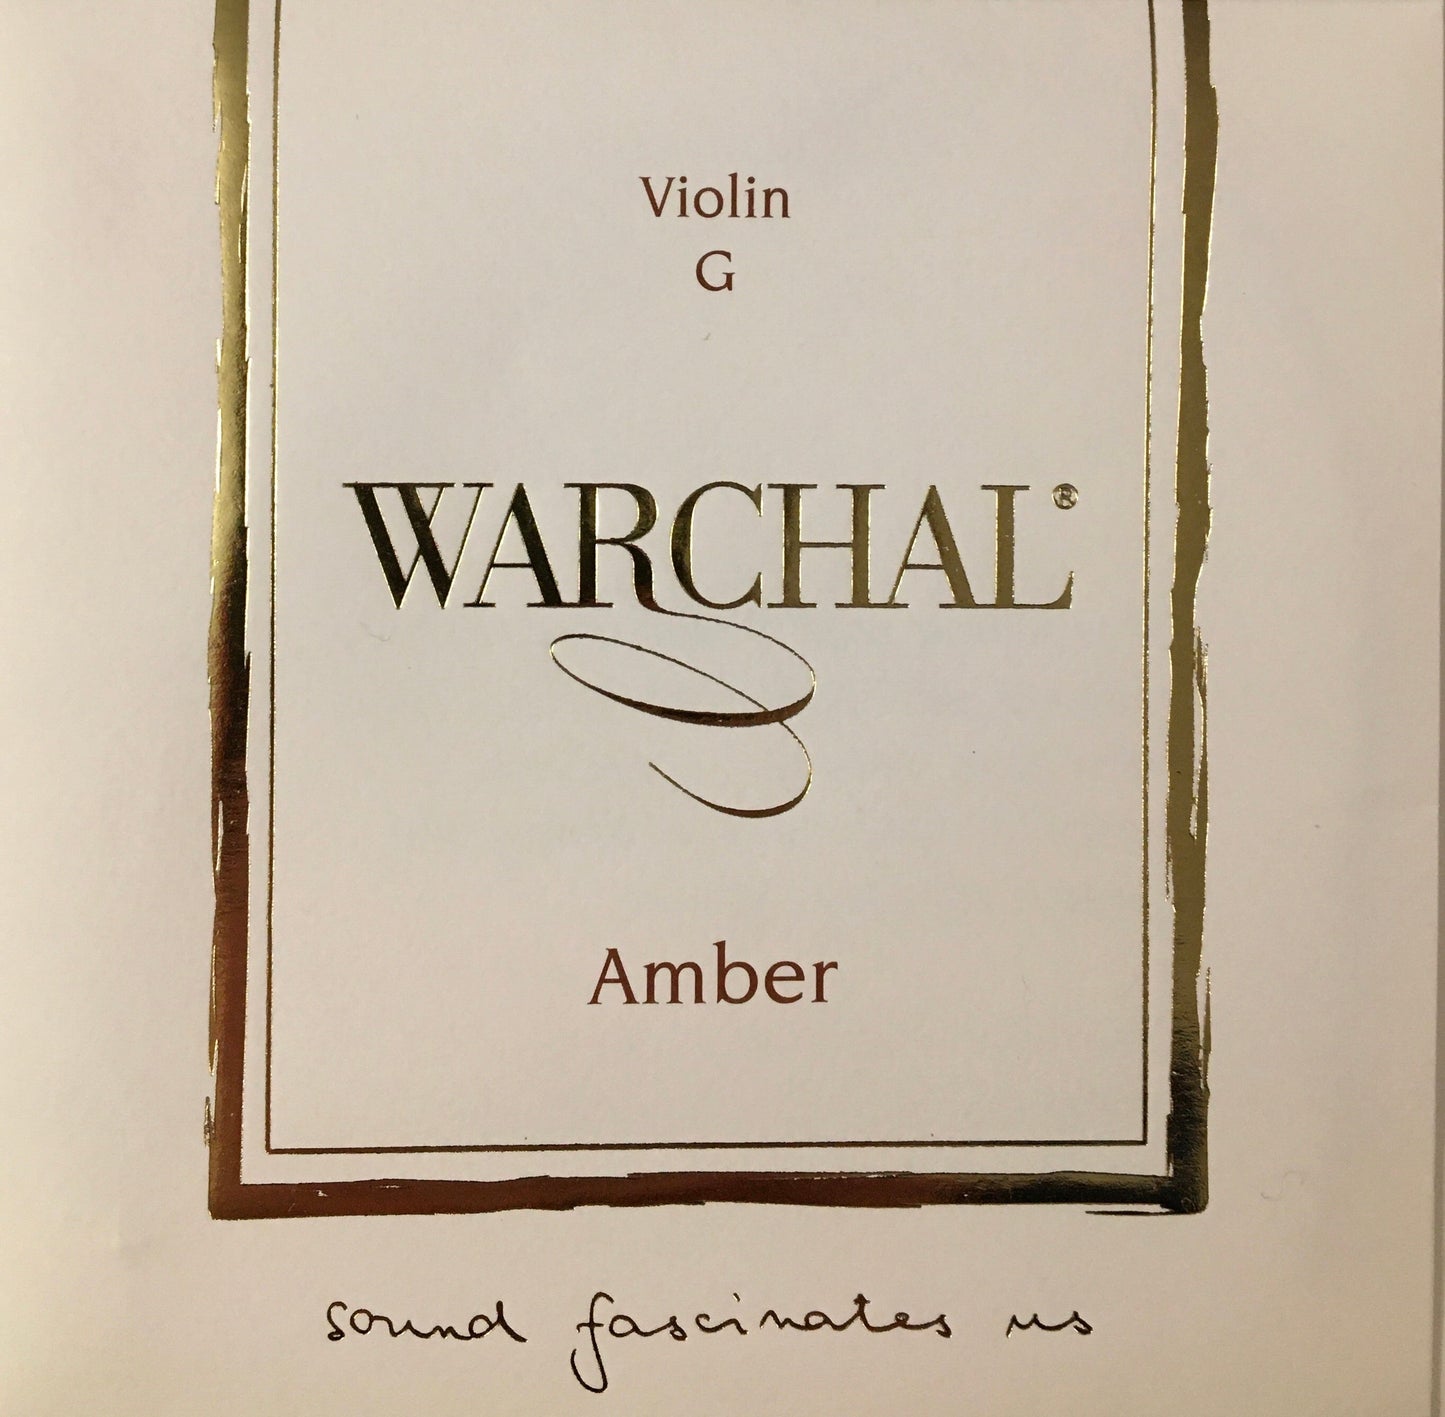 Warchal AMBER Violin Strings Strings, Bows & More